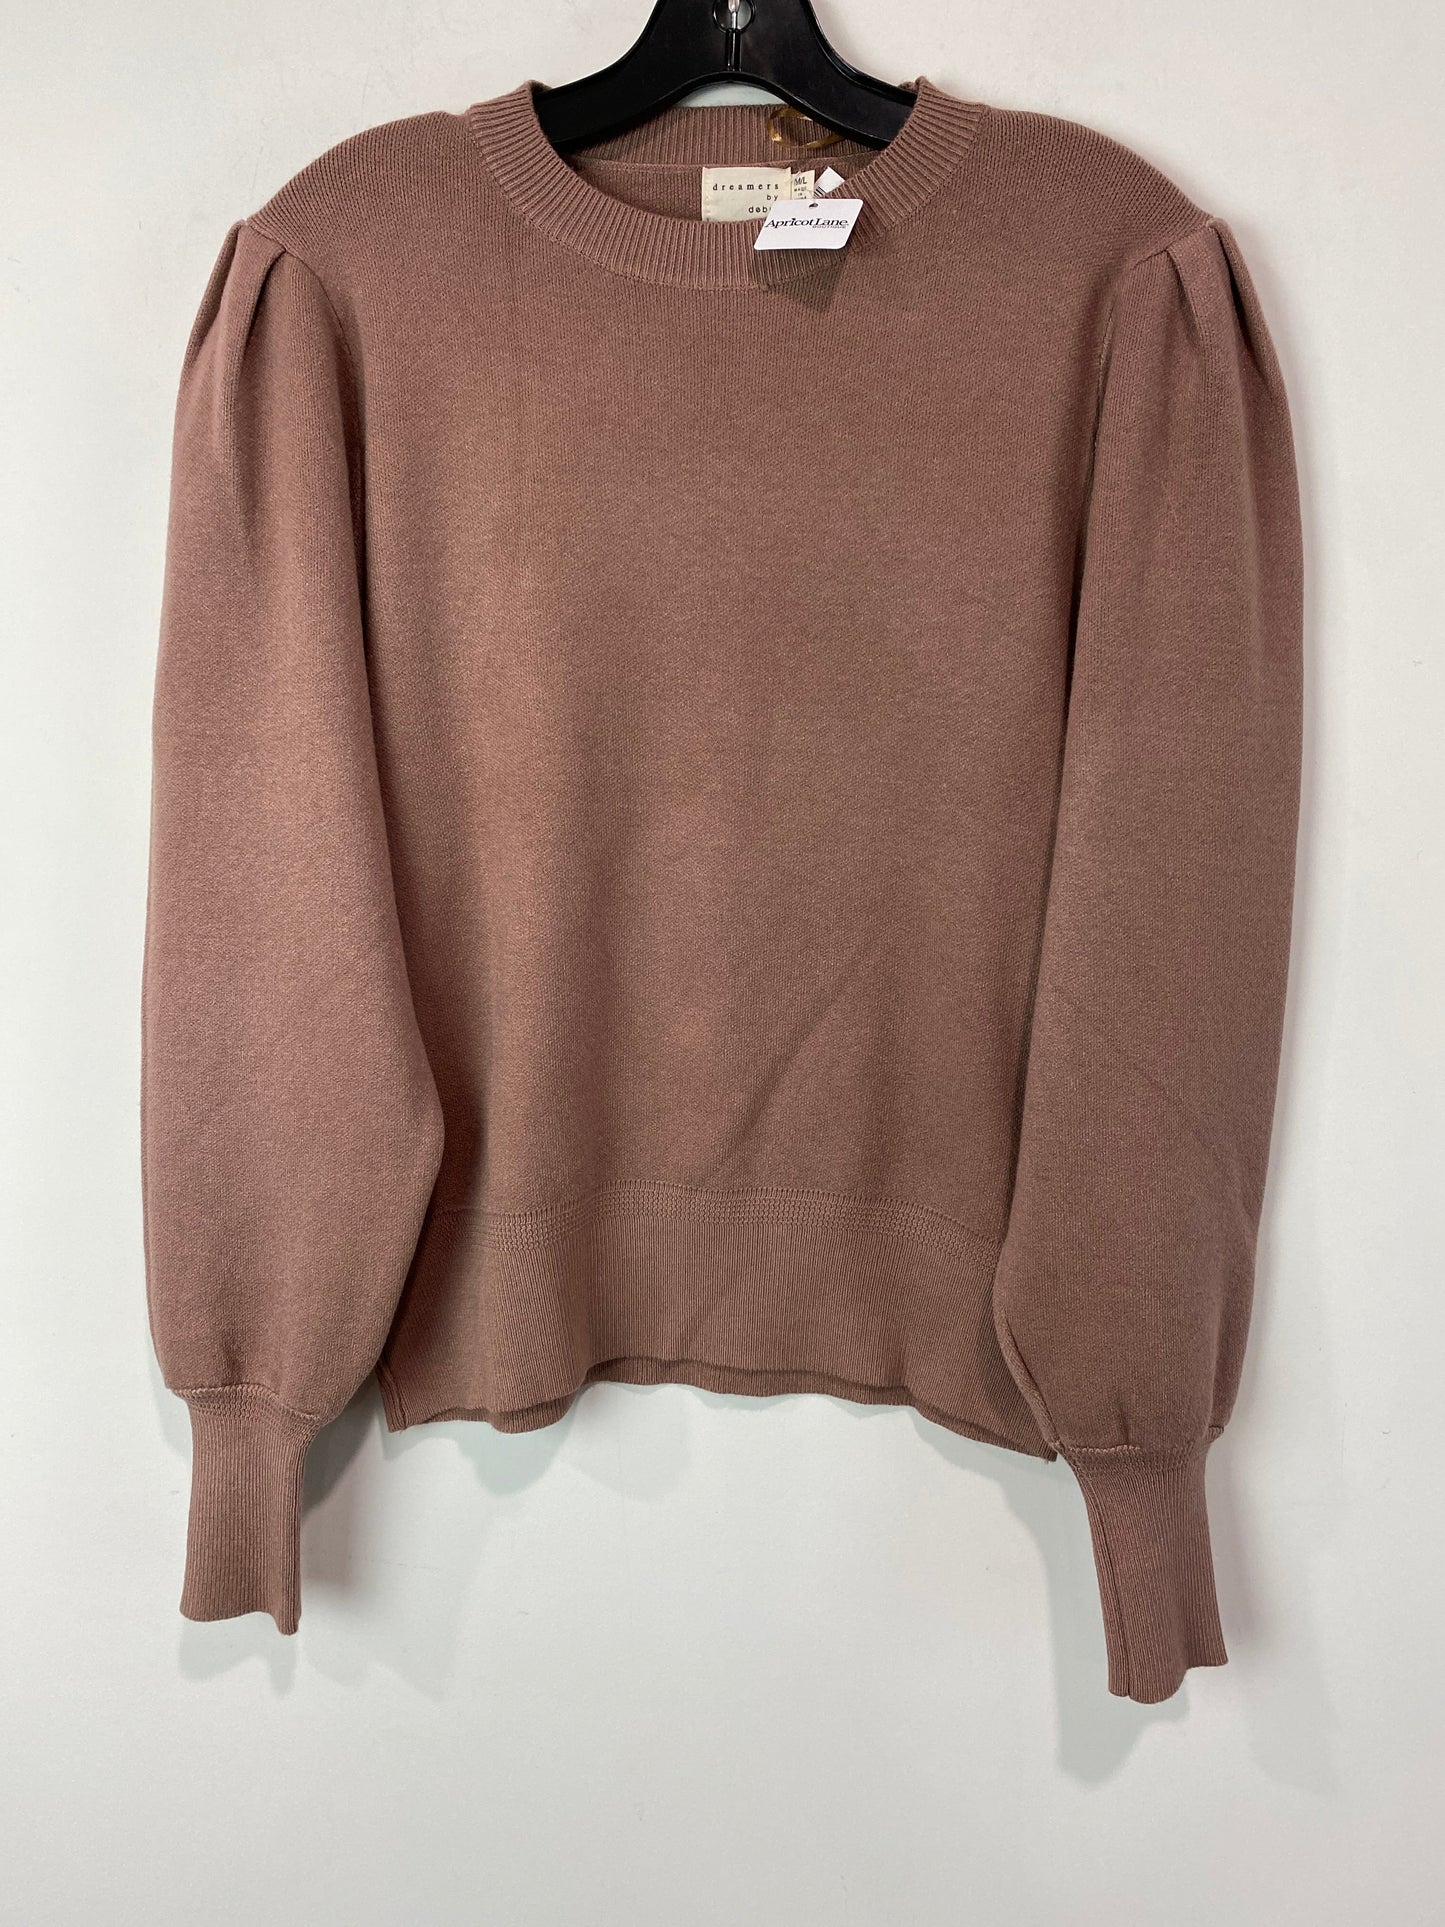 Sweater By Debut  Size: M